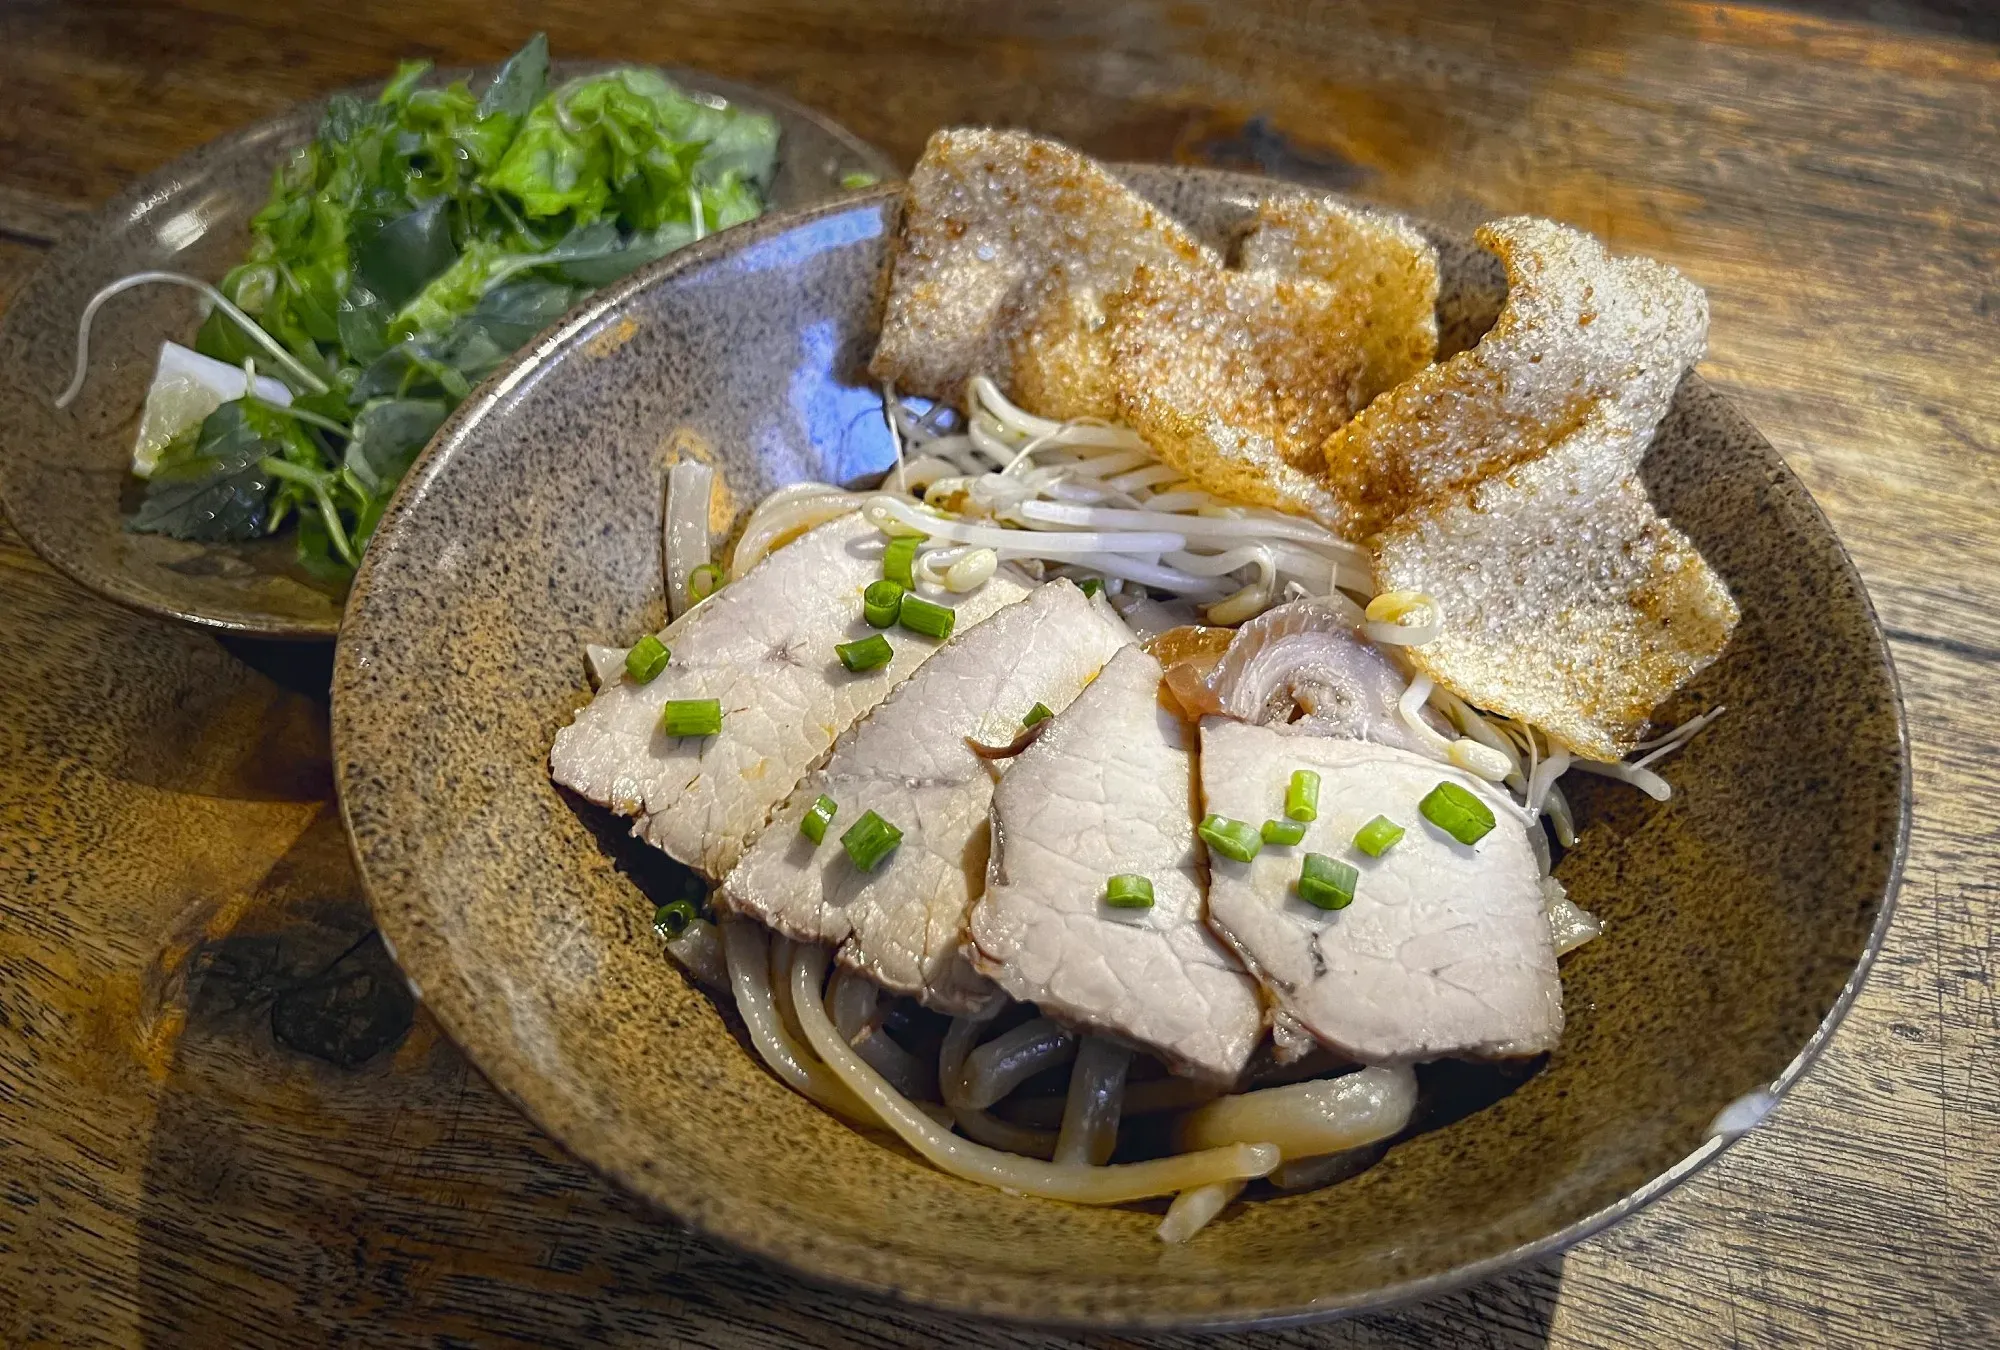 Bowl of Cao Lầu with garnishes in background.